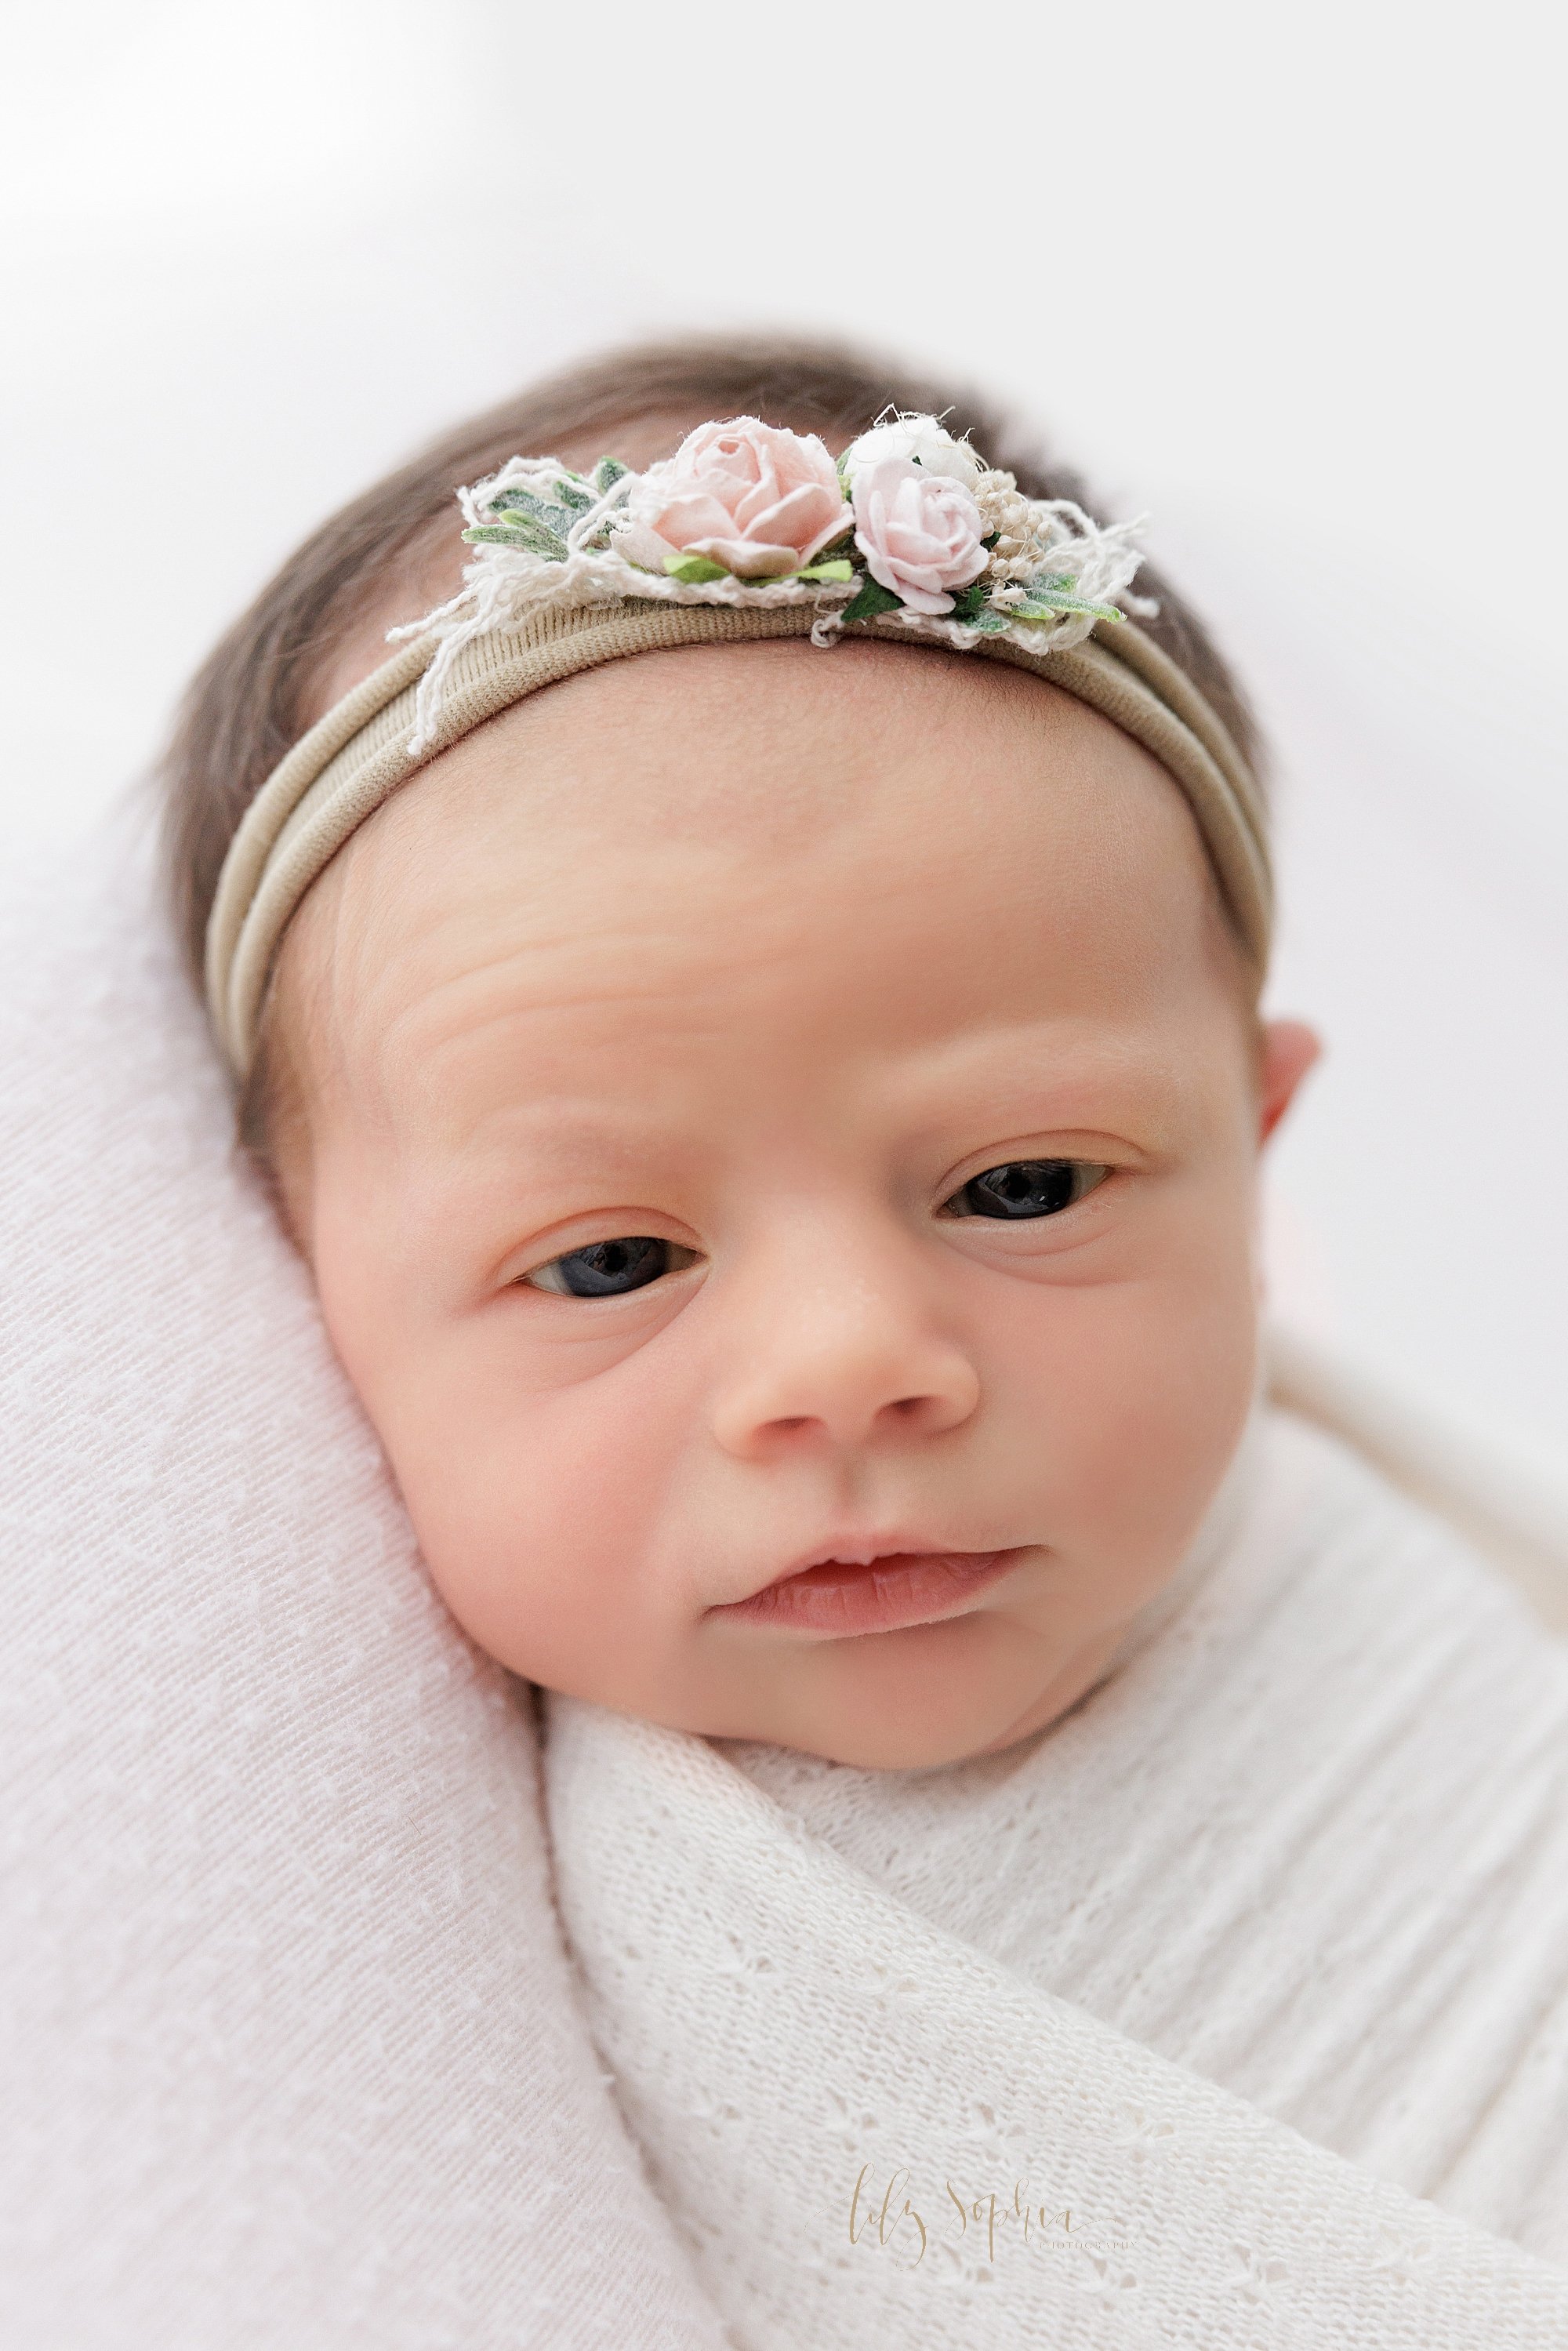  Close-up photo of an awake newborn baby girl as she lies on her back wrapped to her chin in a soft white blanket and wearing a headband in her hair as she looks over her right shoulder taken in a natural light studio near Poncey Highlands in Atlanta